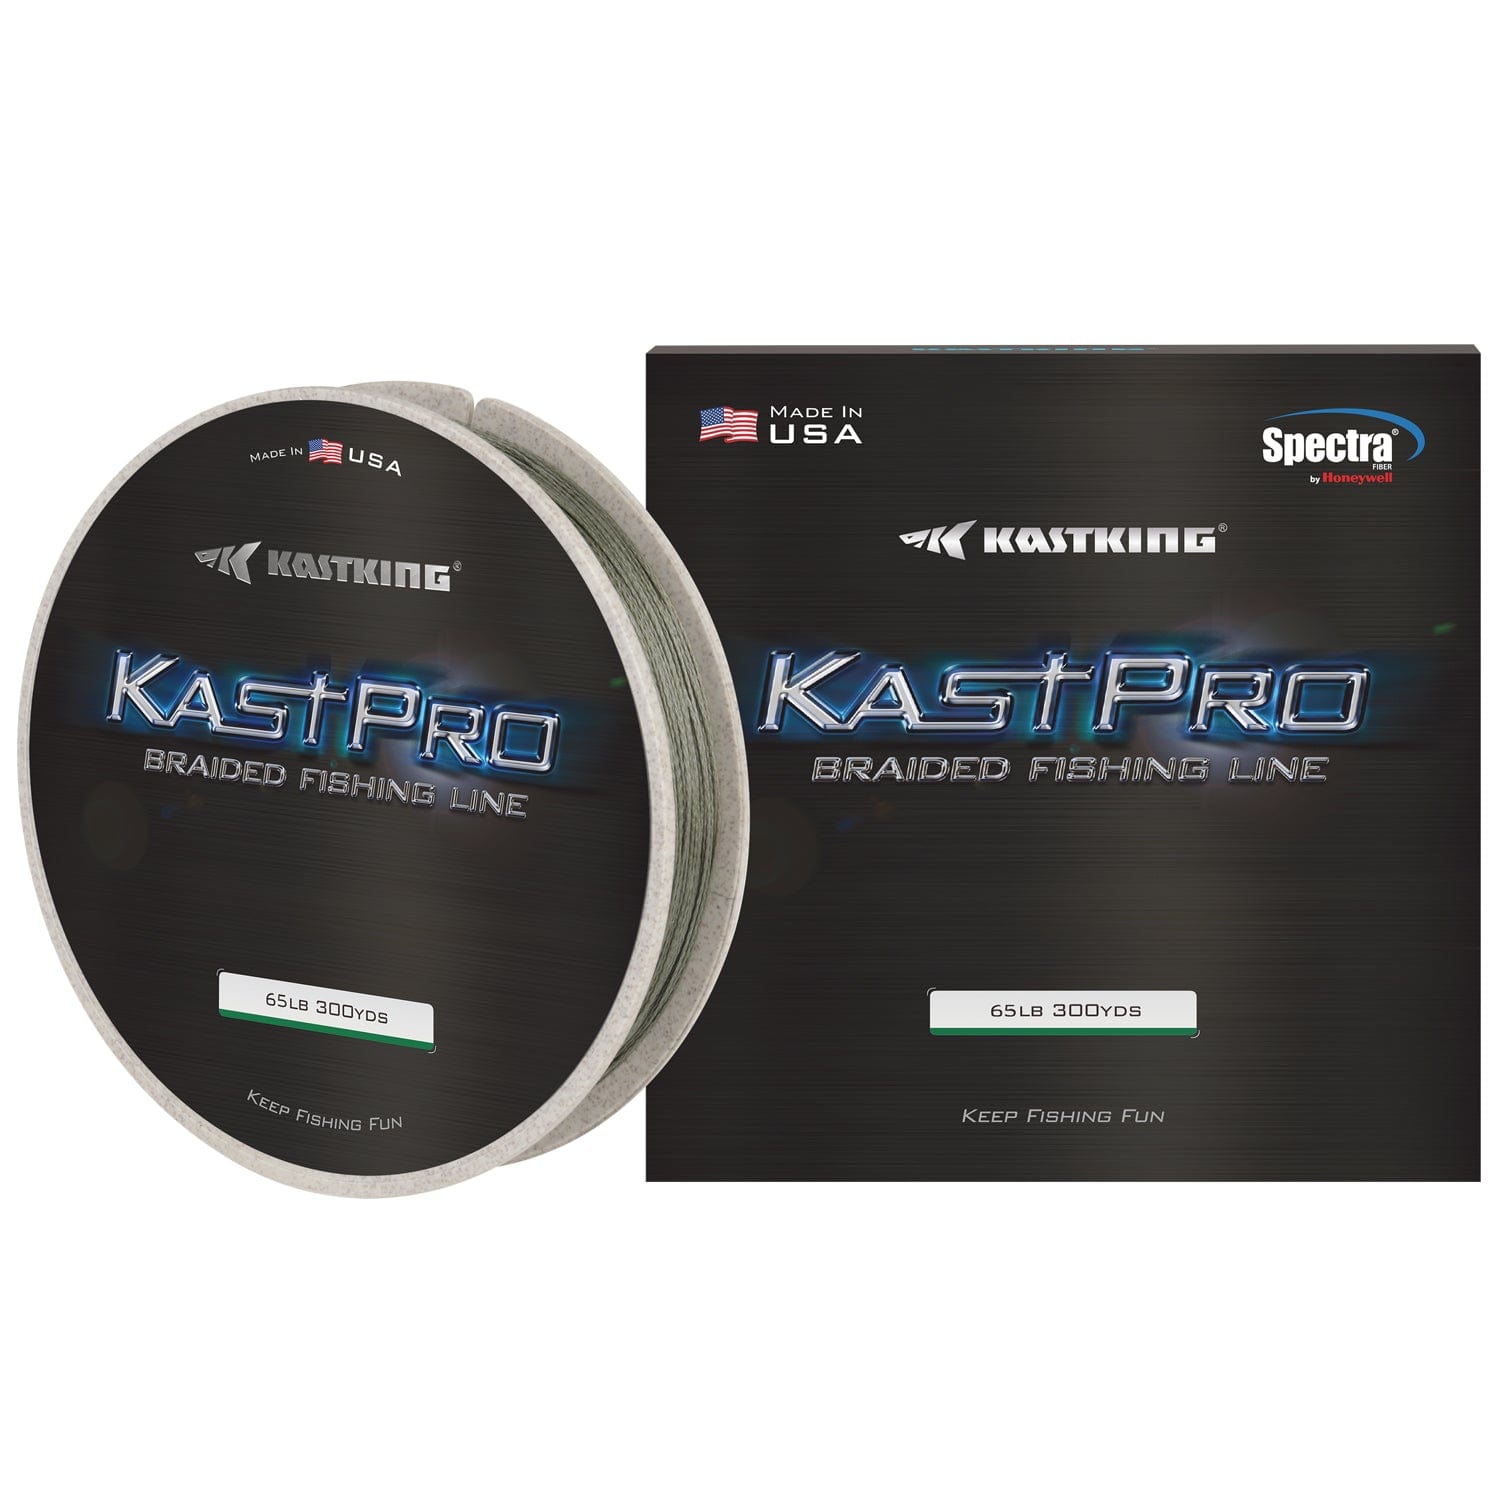 Lazer Pro Cast Camo Braided fishing line from fishing tackle shop